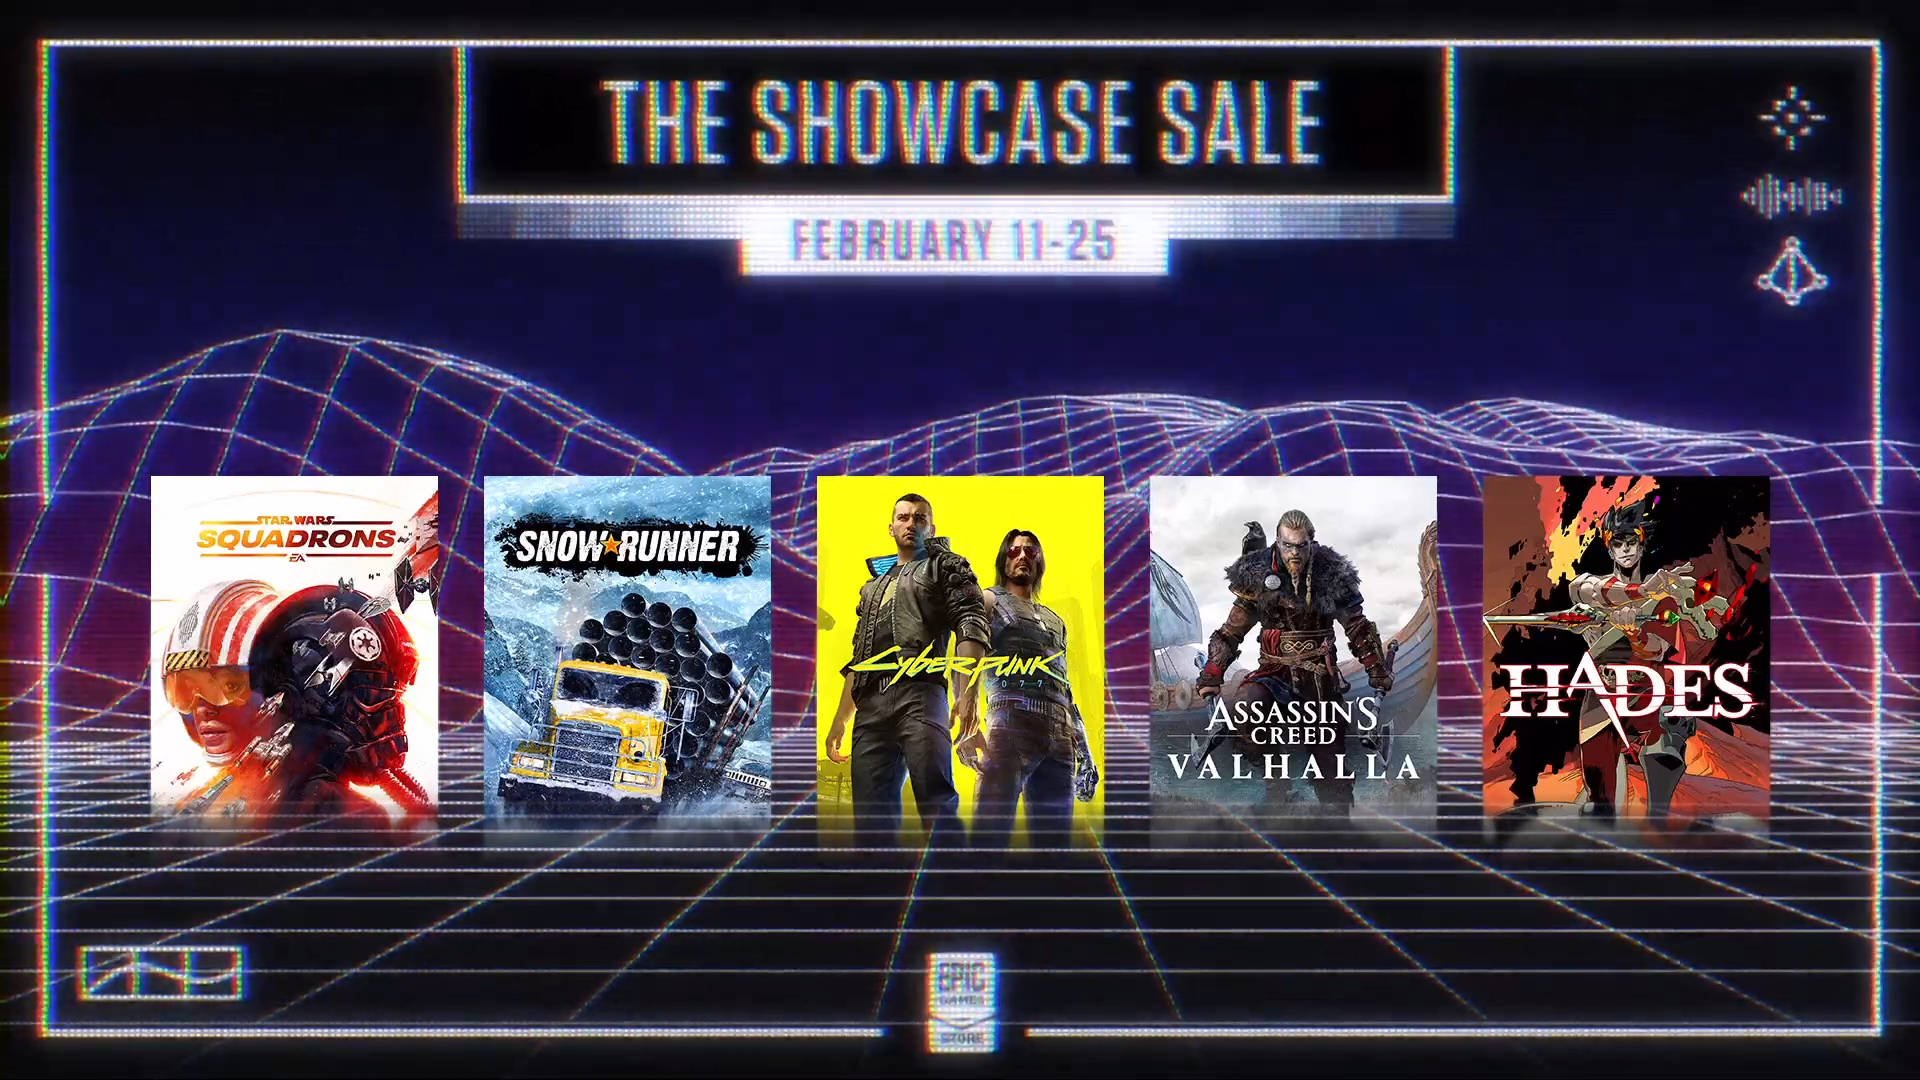 The Epic Games Store Showcase Sale